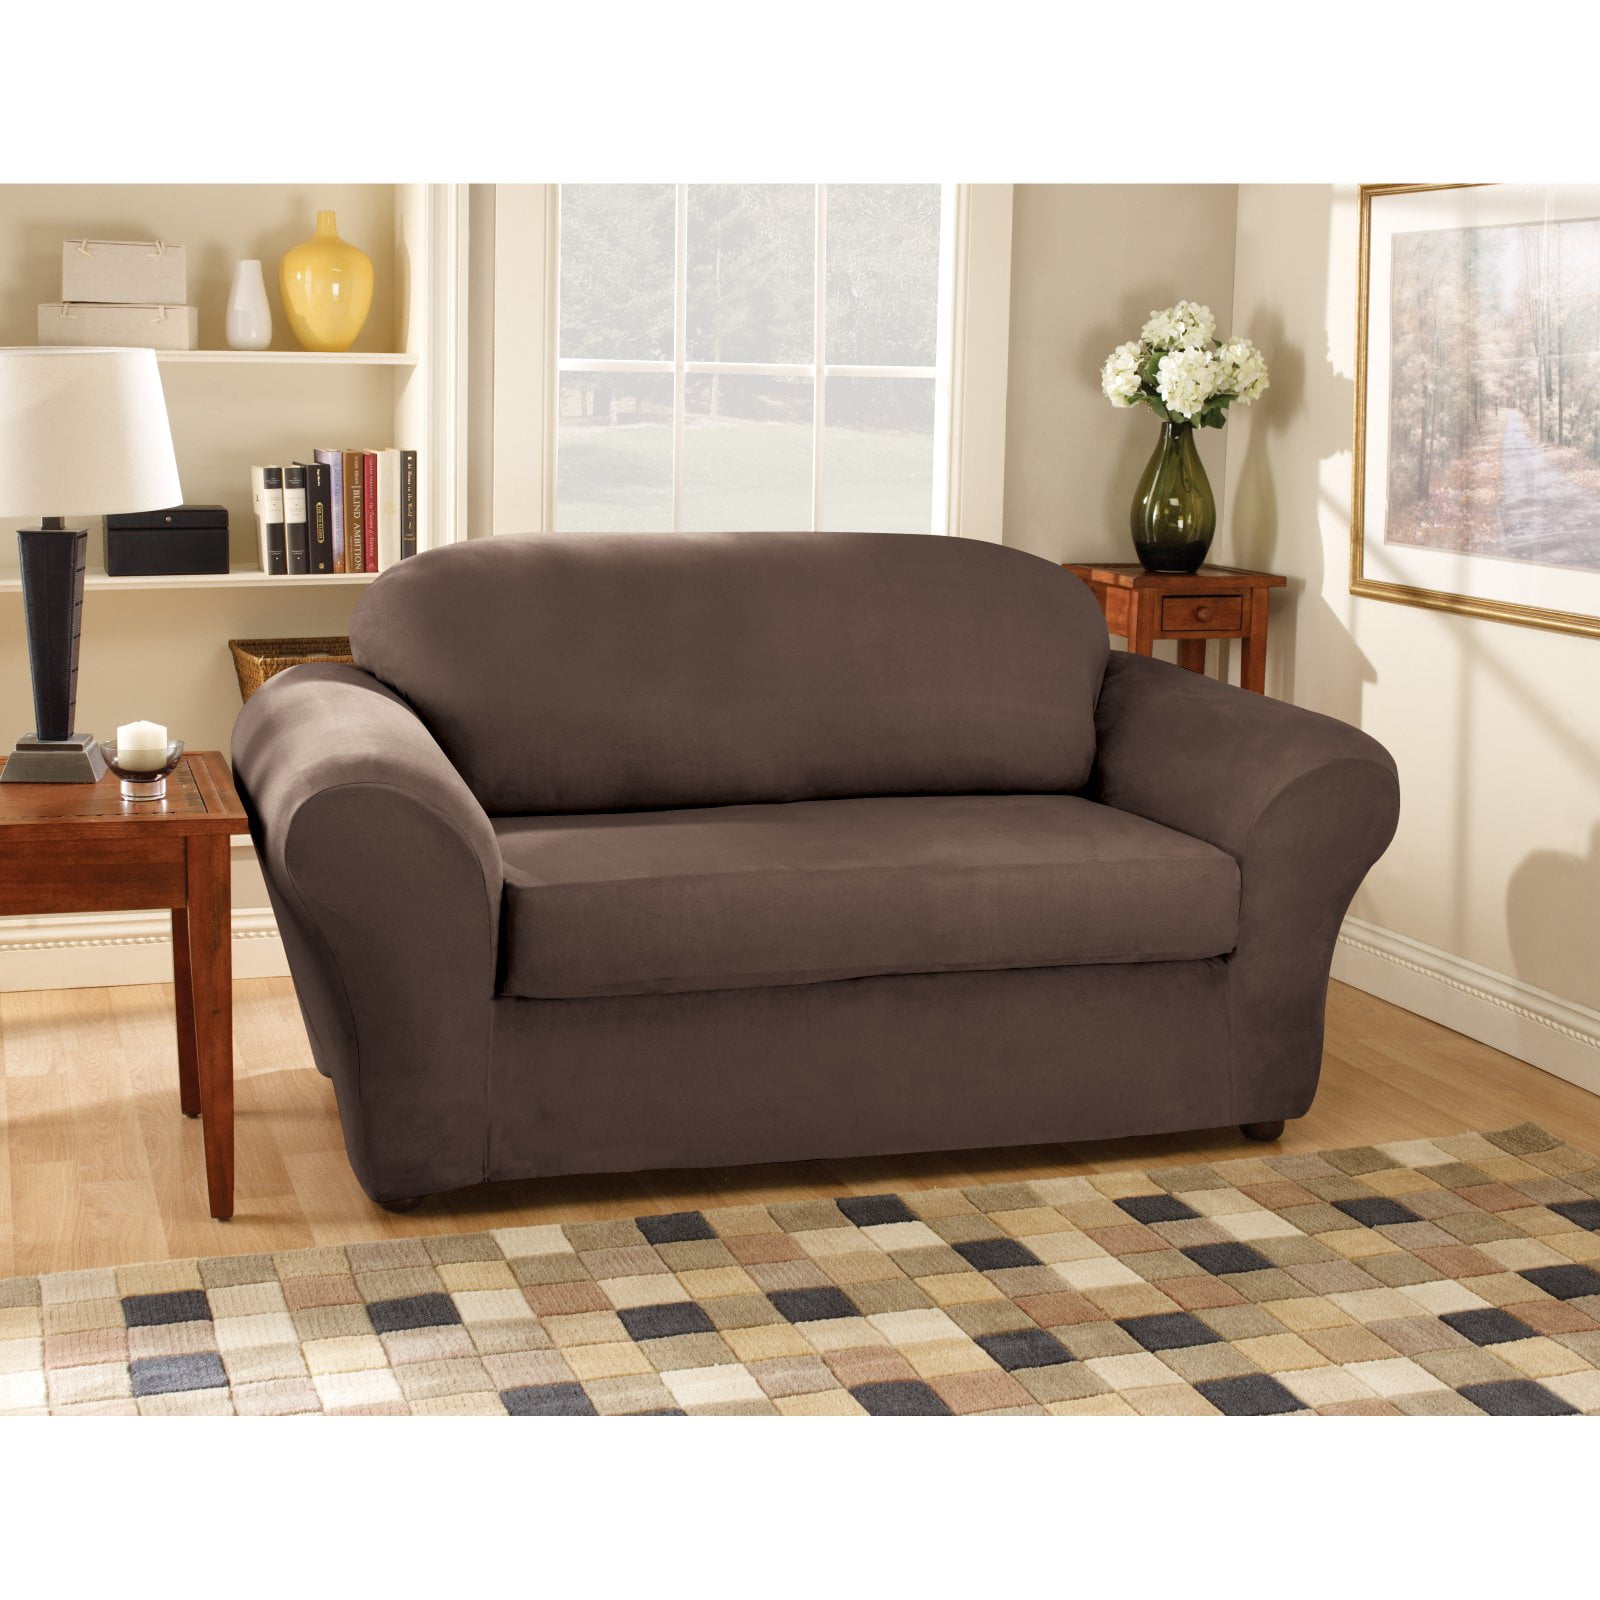 Chocolate LOVESEAT Slipcover Sure Fit Soft Suede  BOX Cushion 